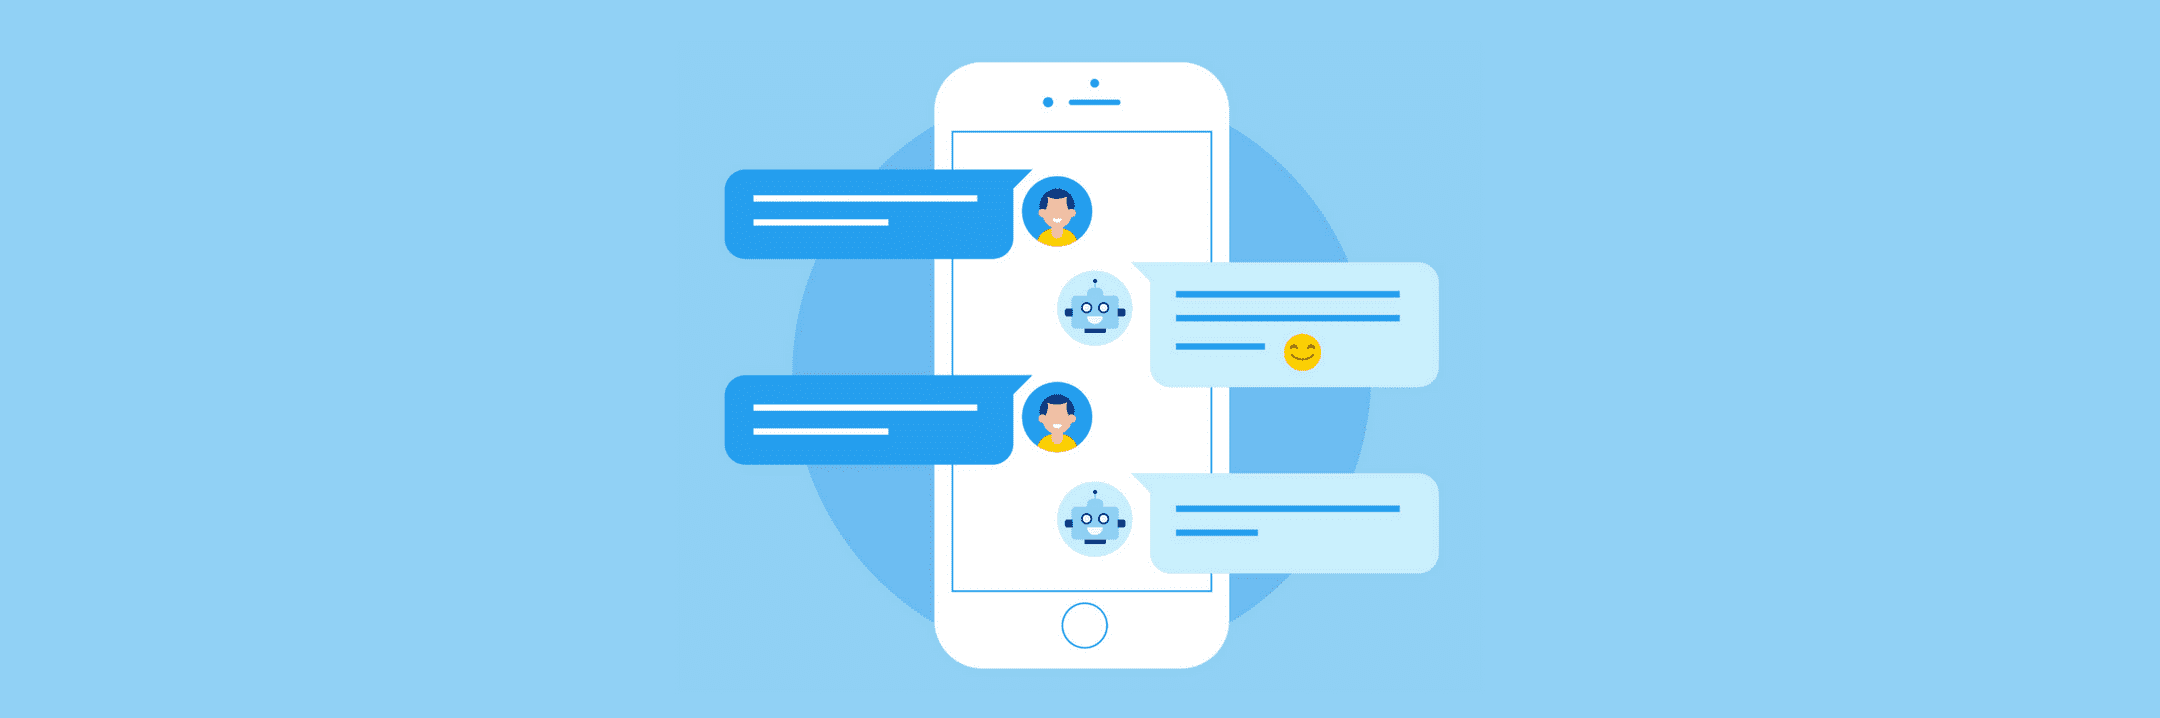 chat bot customer experience